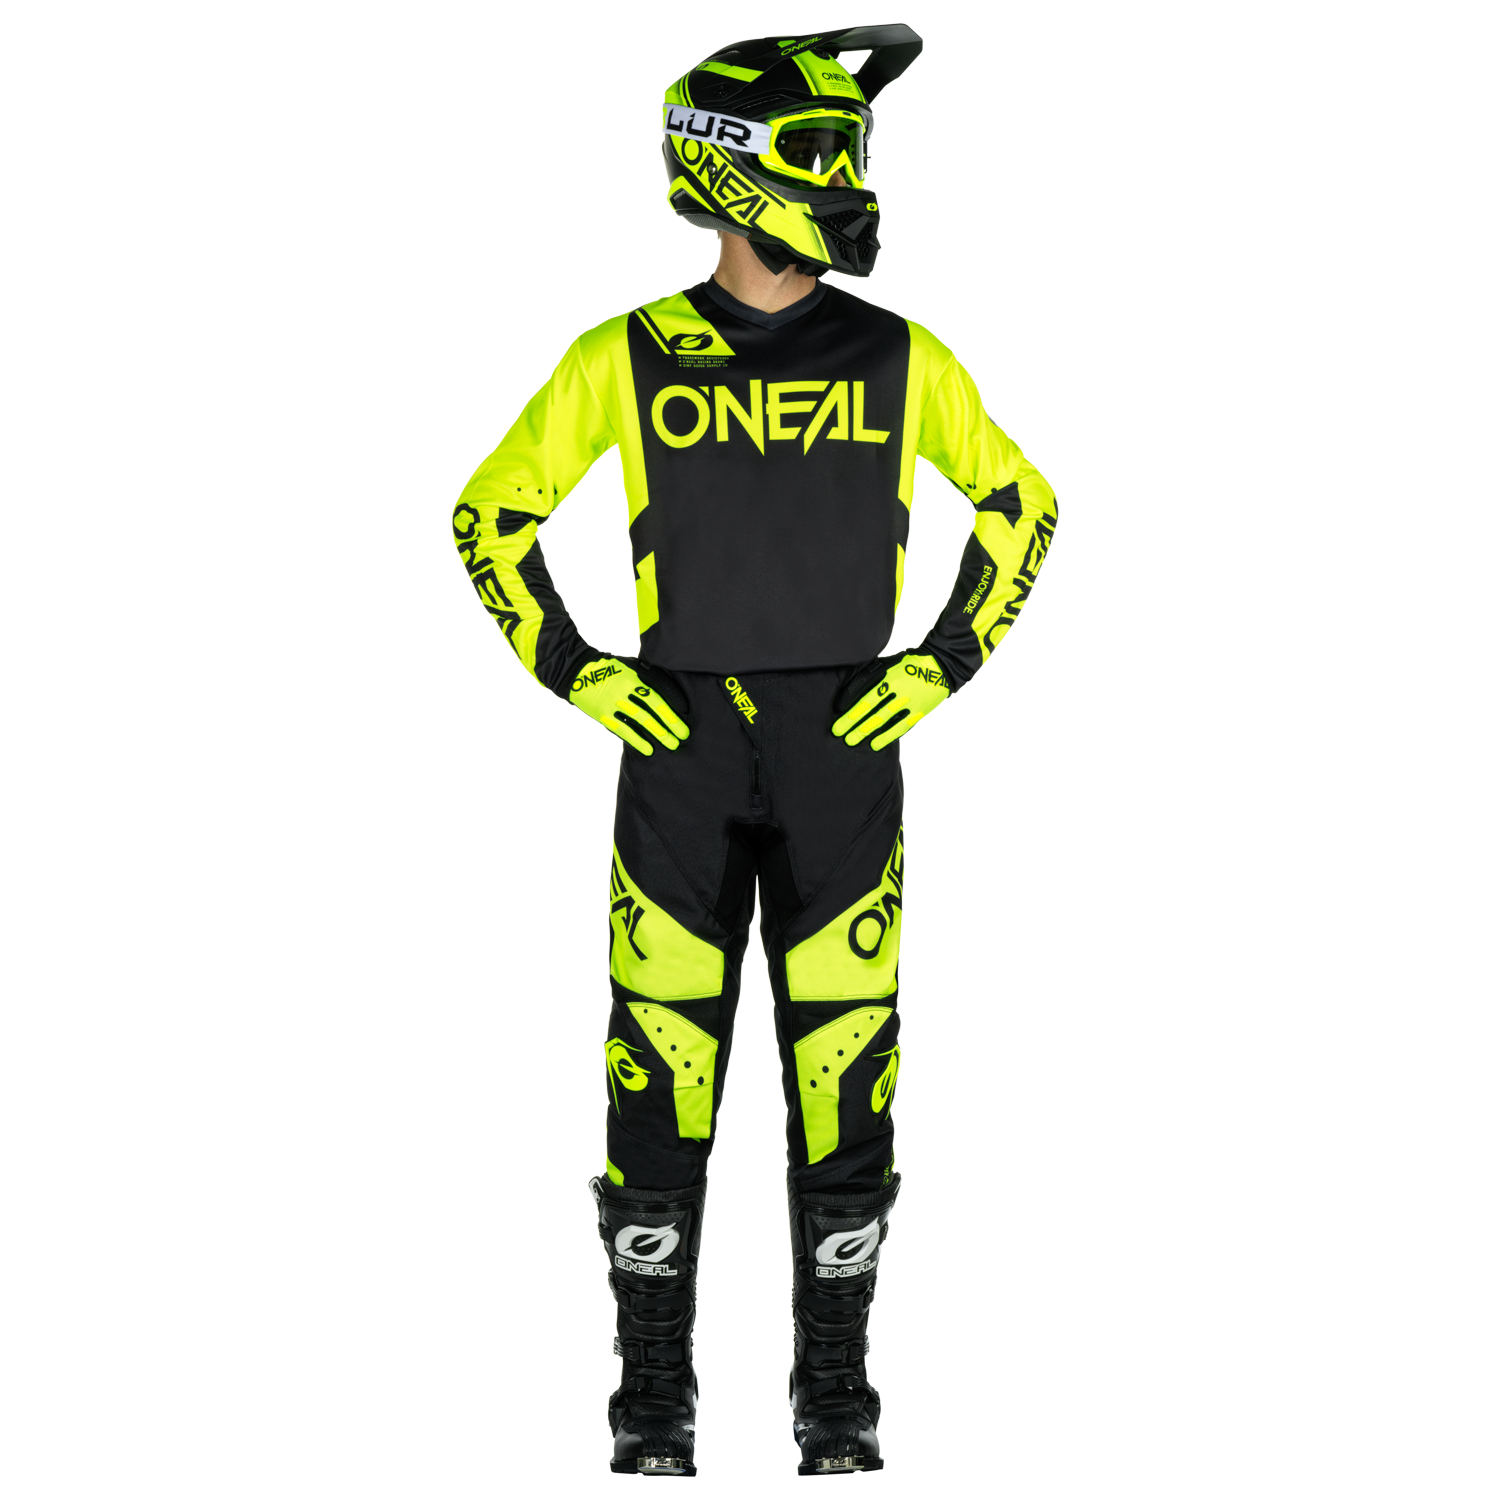 O'NEAL PEEWEE Protège-coudes jaune fluo